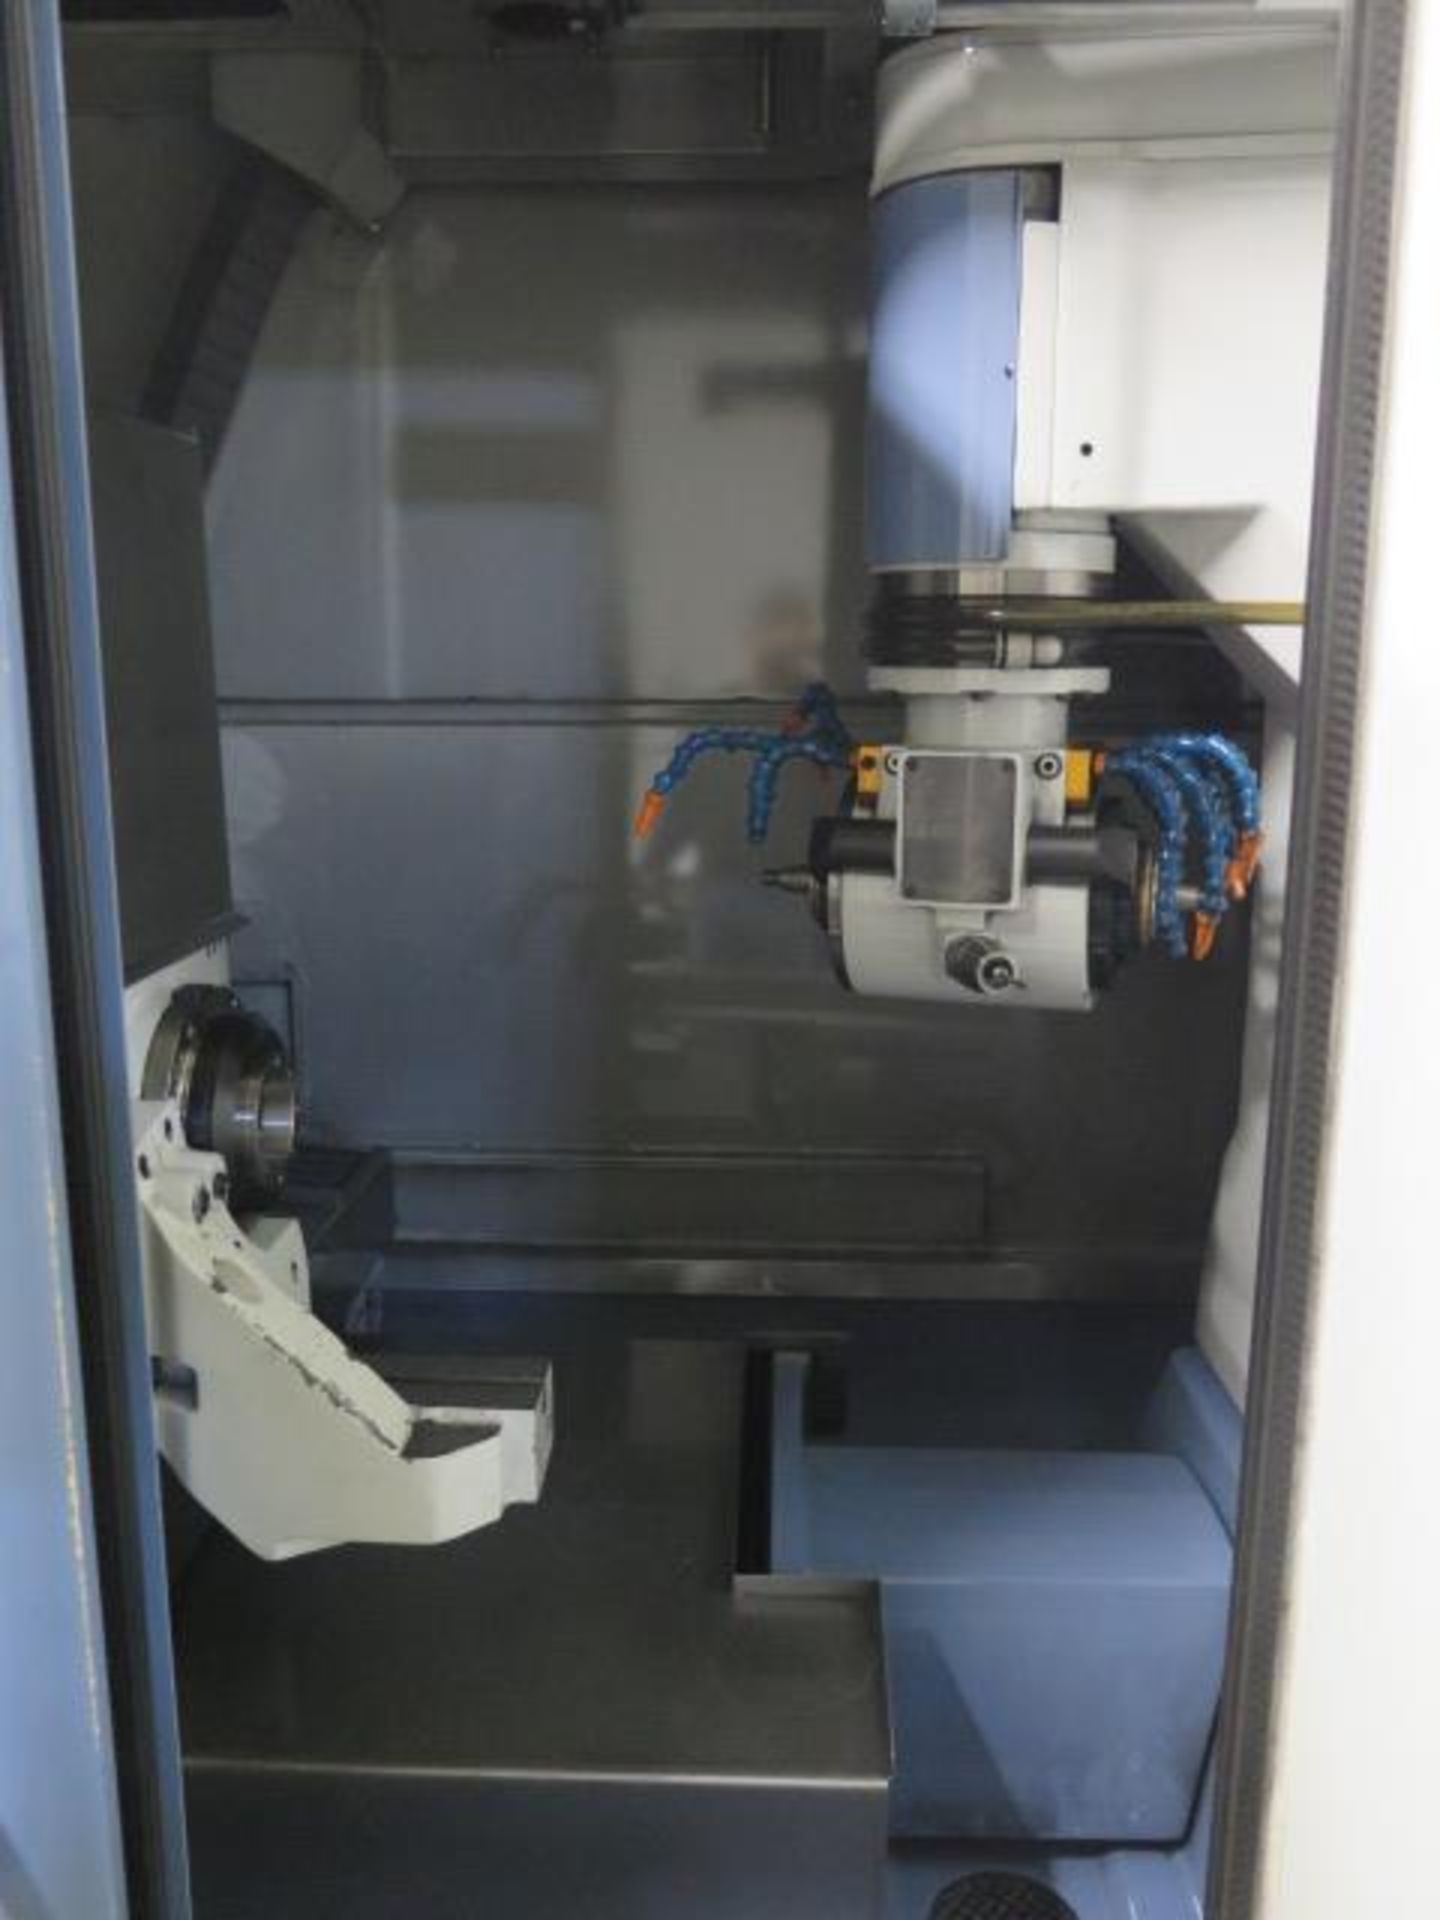 2012 Anca “Fastgrind” 7-Axis CNC Tool and Cutter Grinder s/n 750431 w/ Anca PC Controls, SOLD AS IS - Image 4 of 18